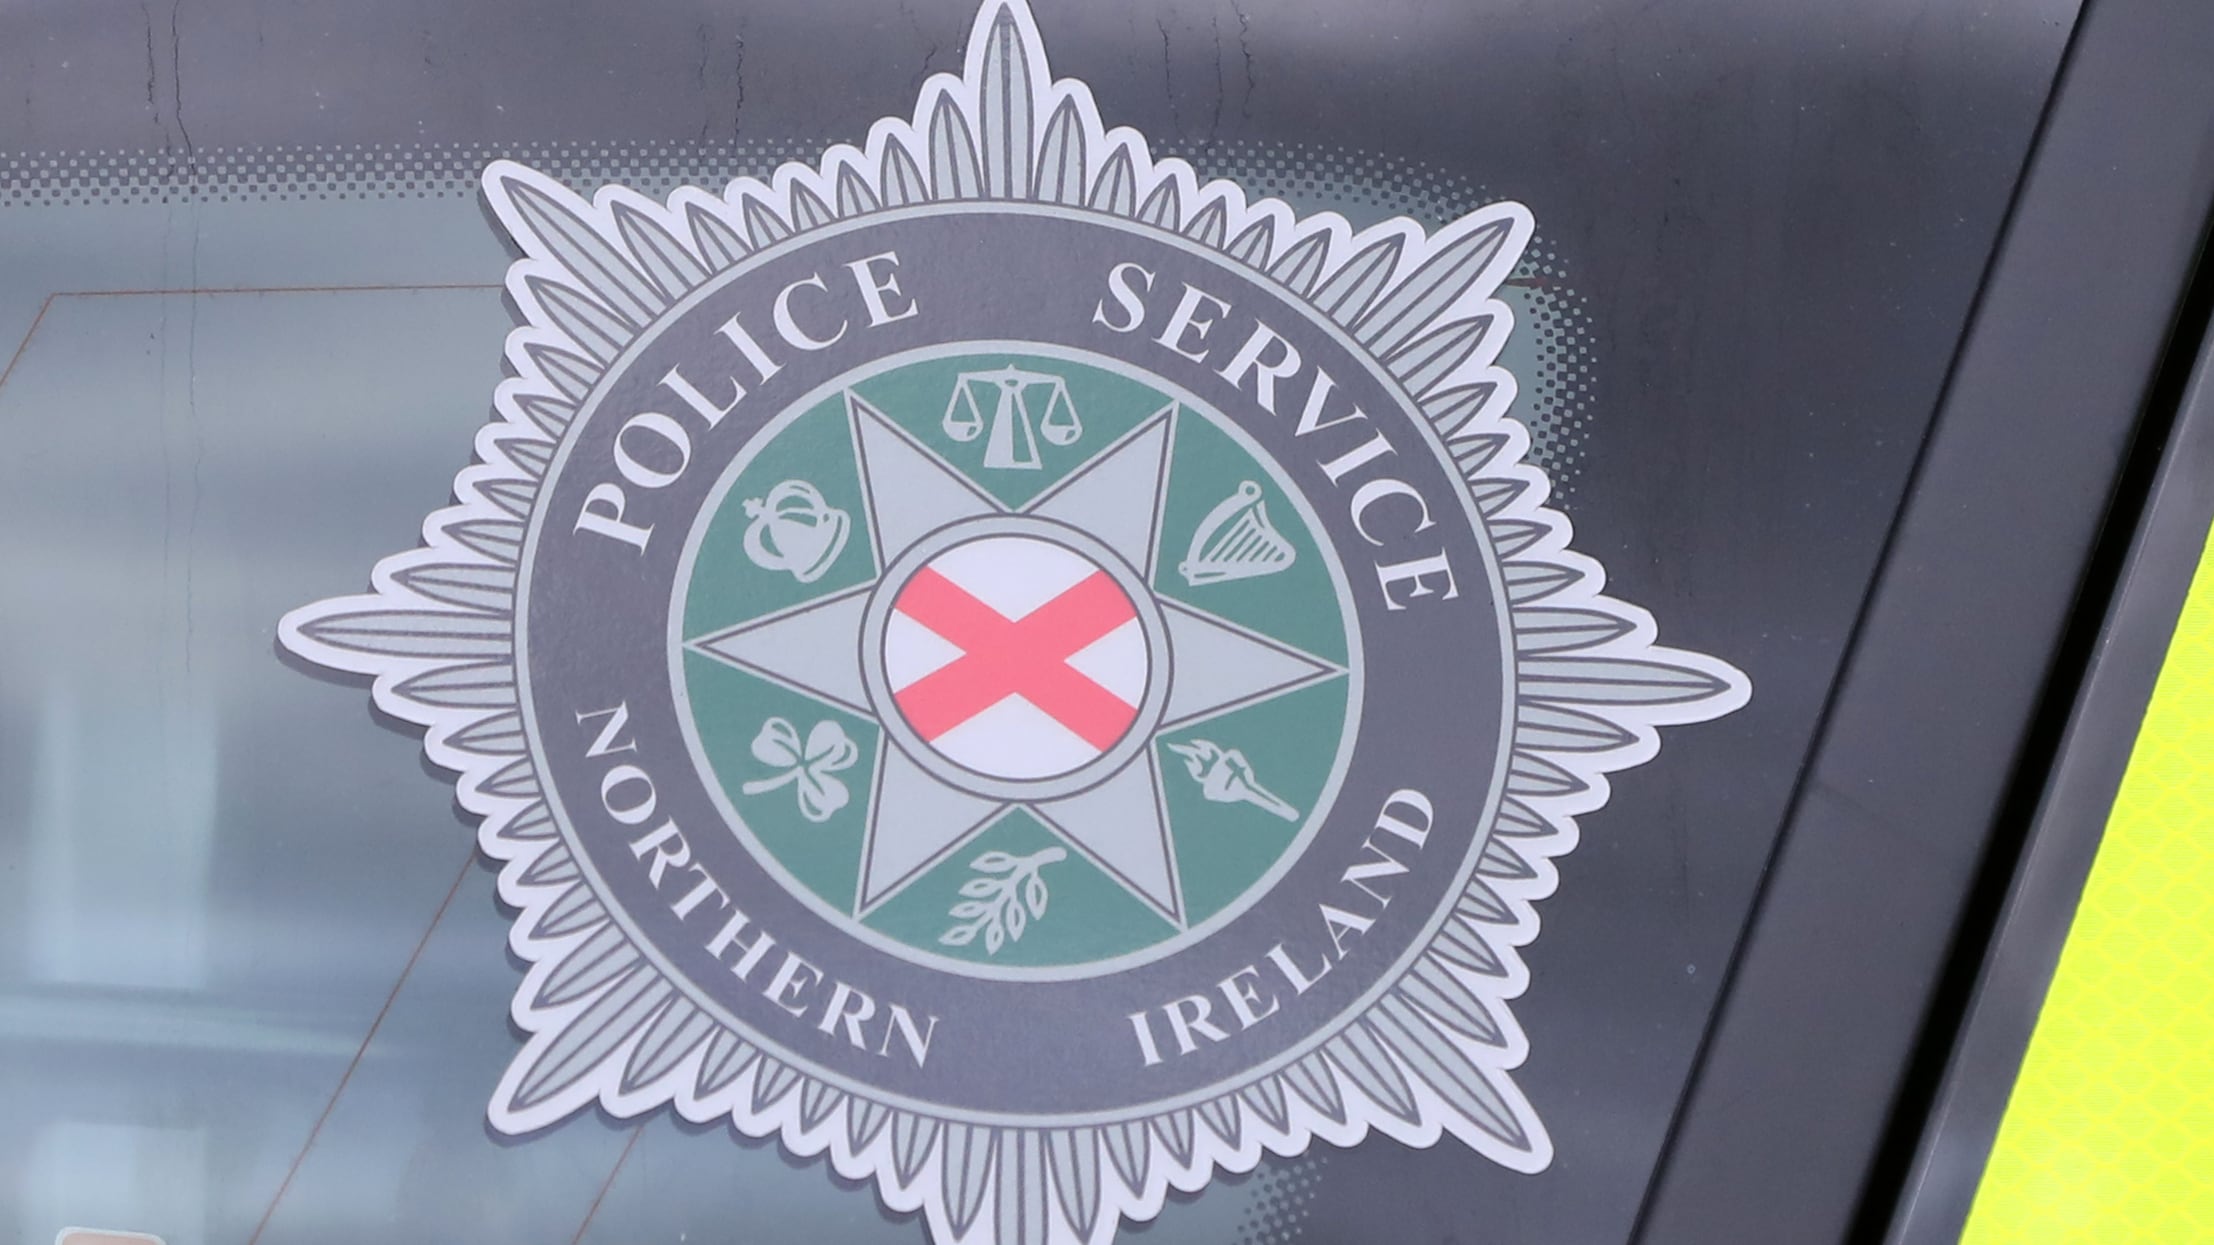 A man has been charged following a shooting incident in Co Fermanagh